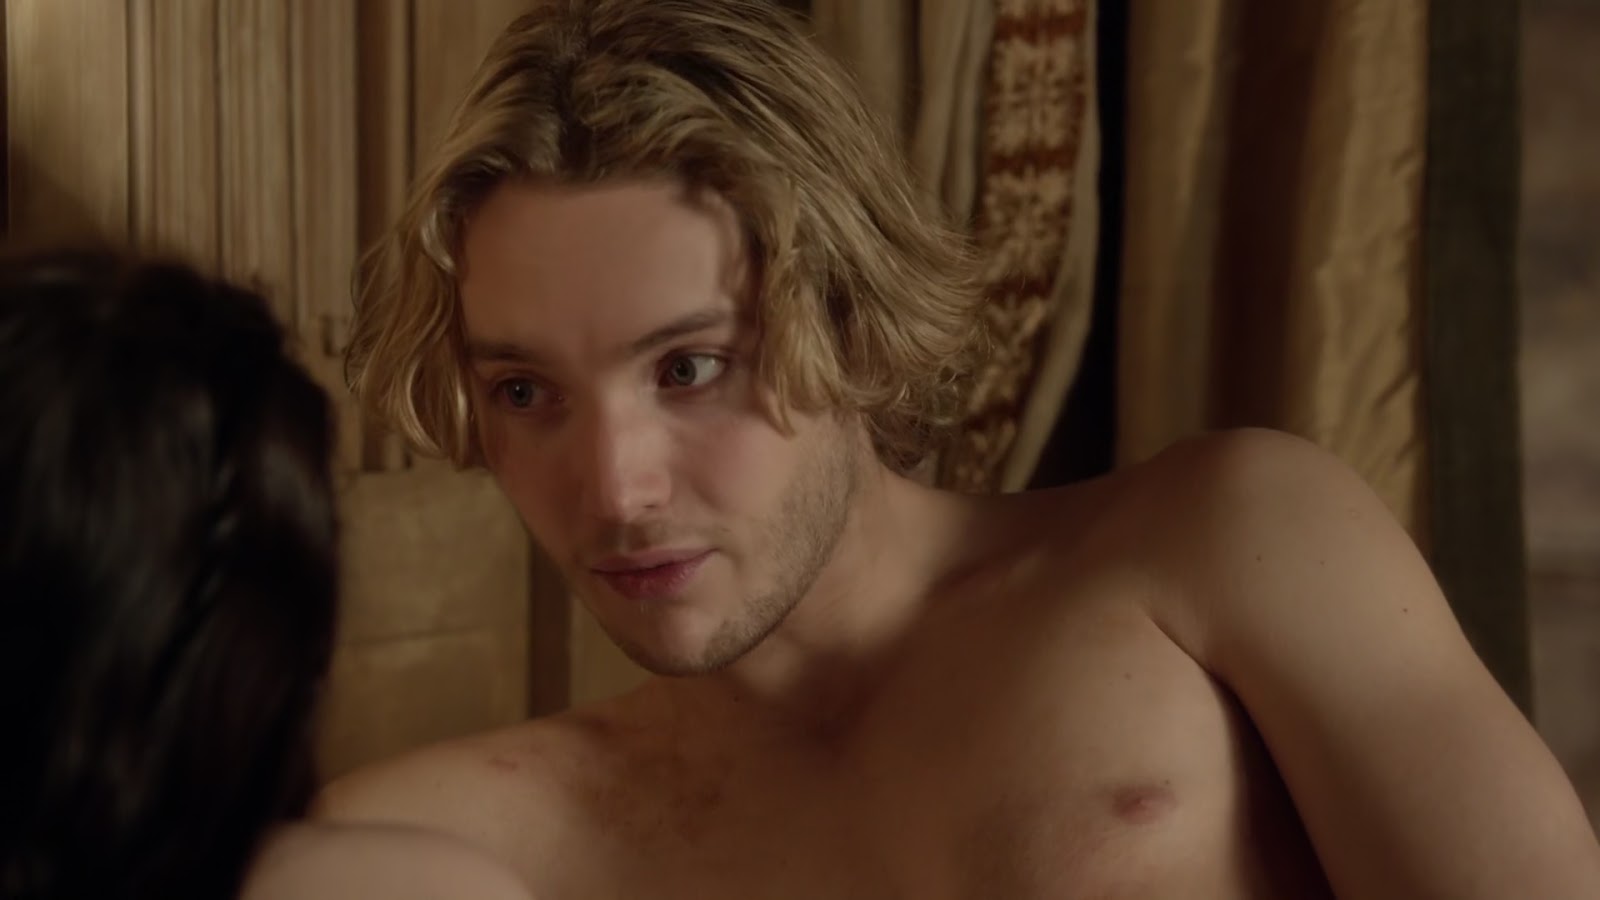 Toby Regbo shirtless in Reign 1-21 "Long Live The King" .